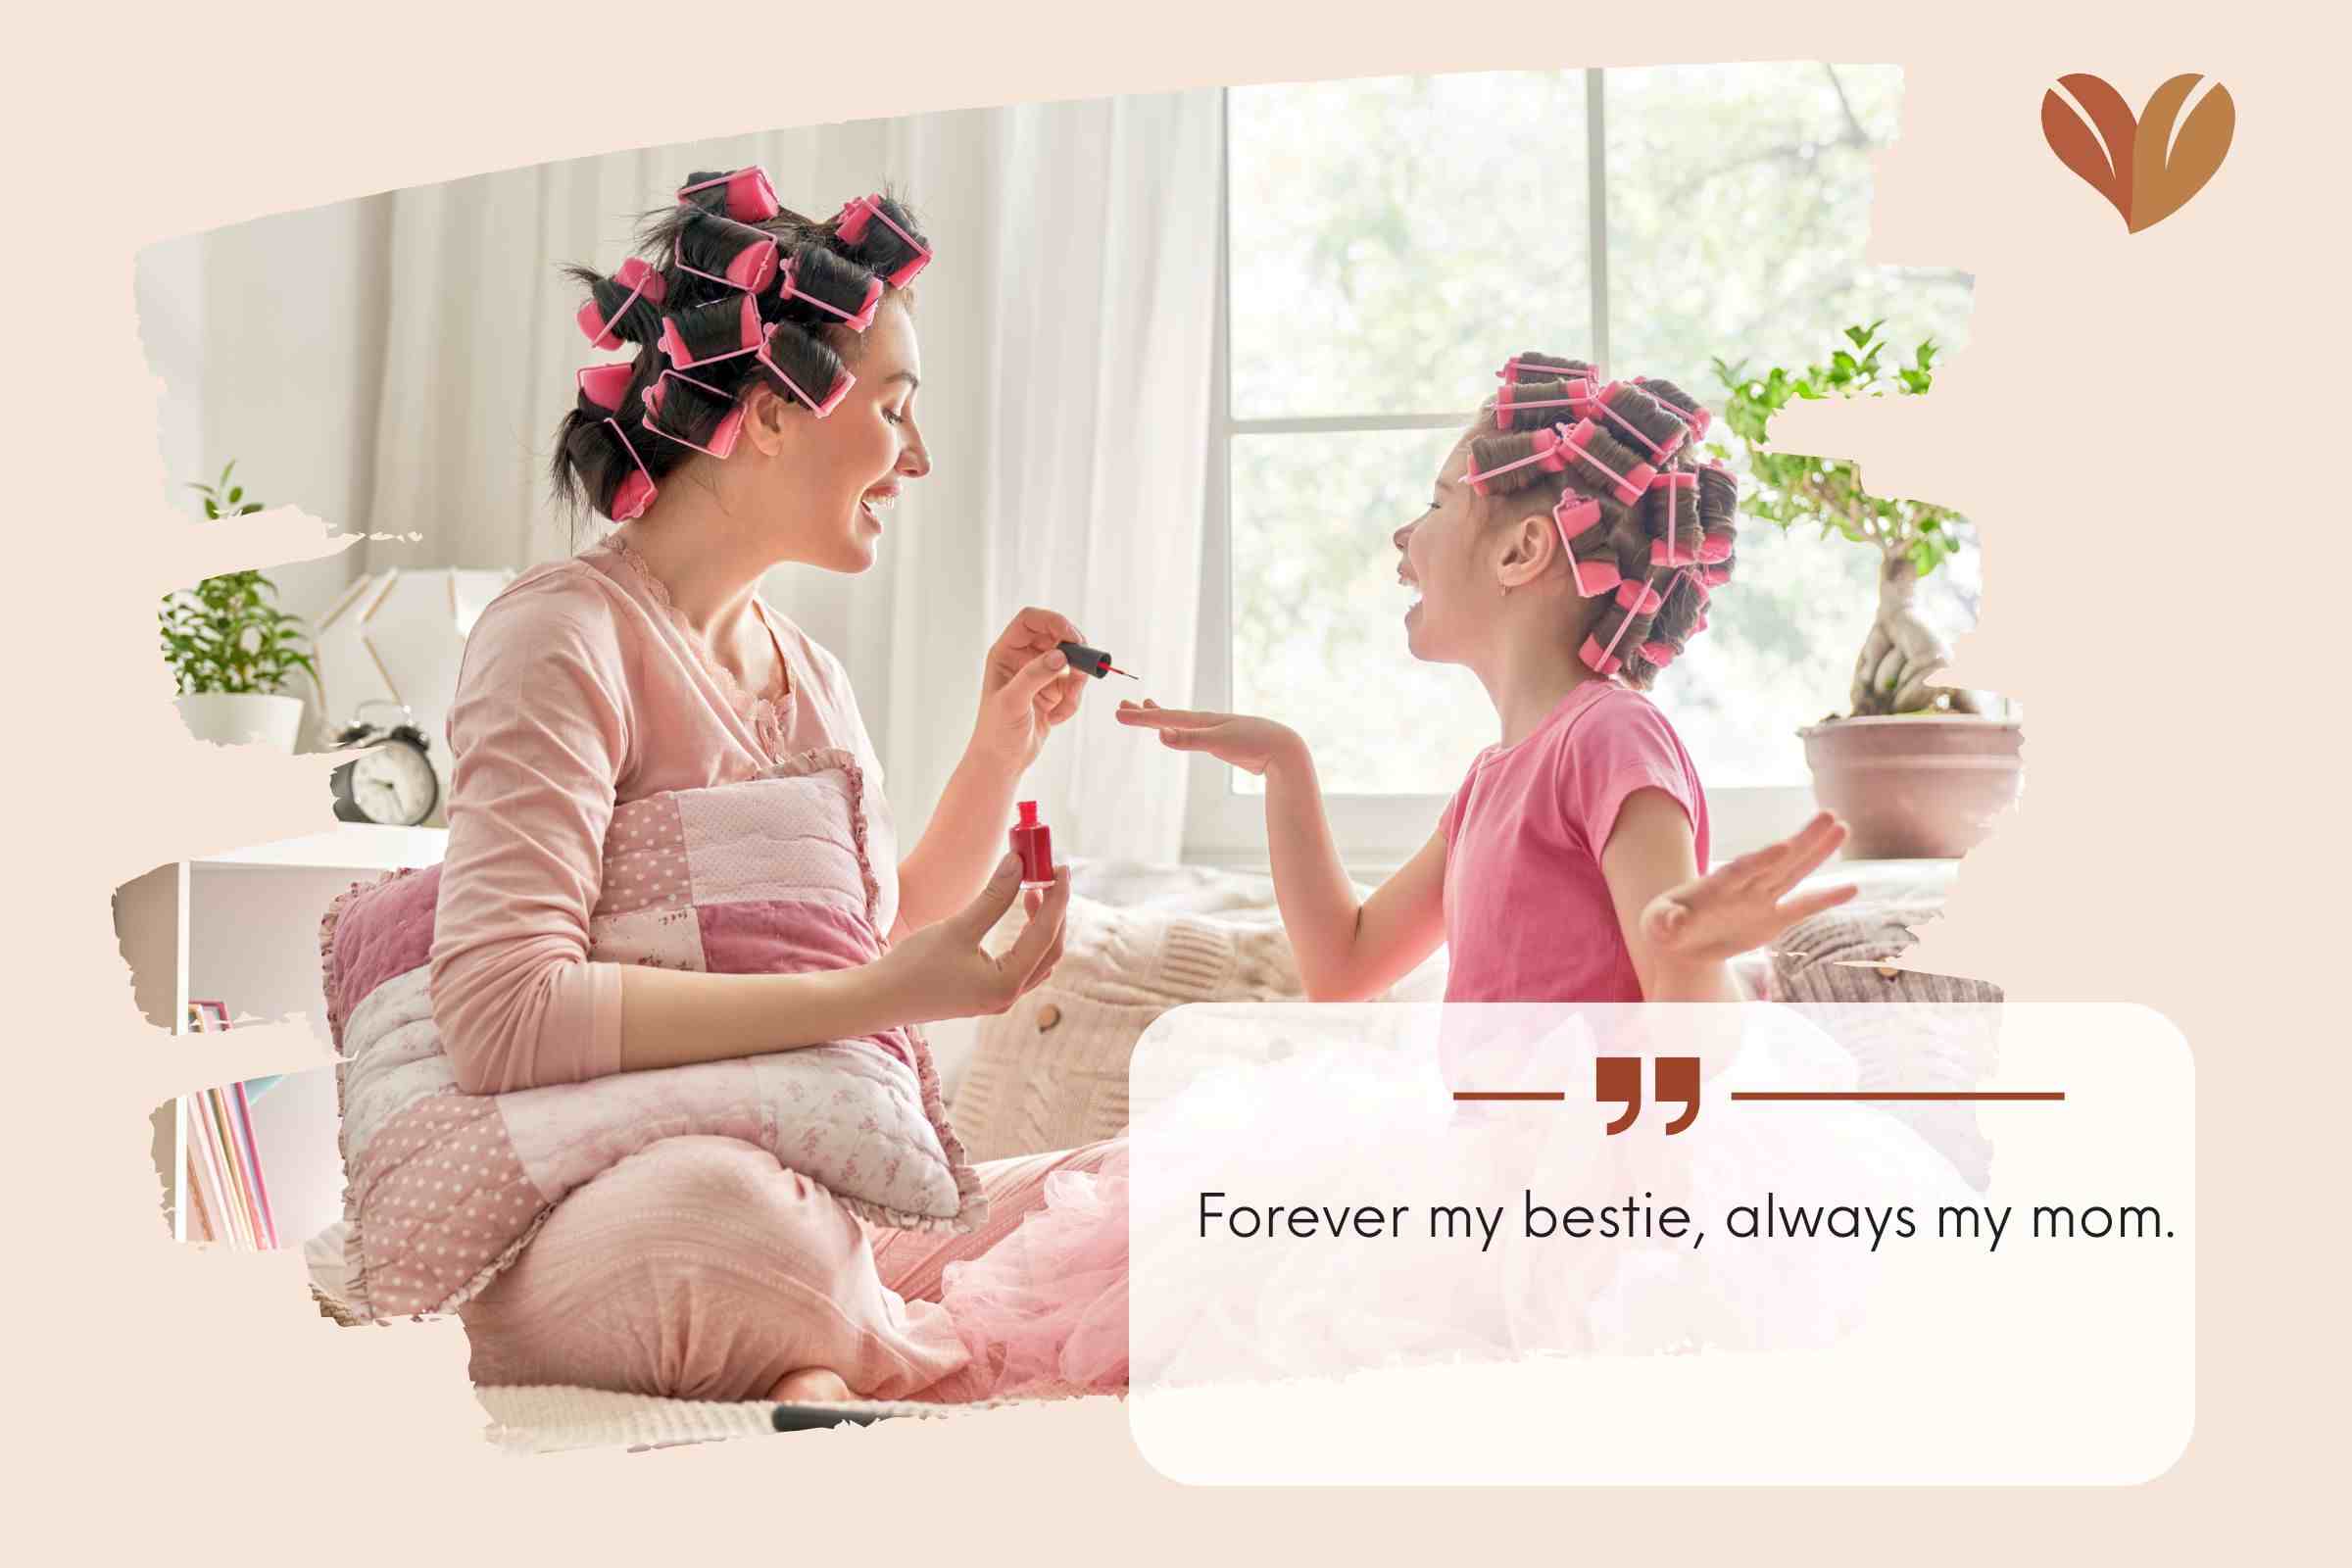 Mother Daughter Quotes For Instagram - Forever my bestie, always my mom.